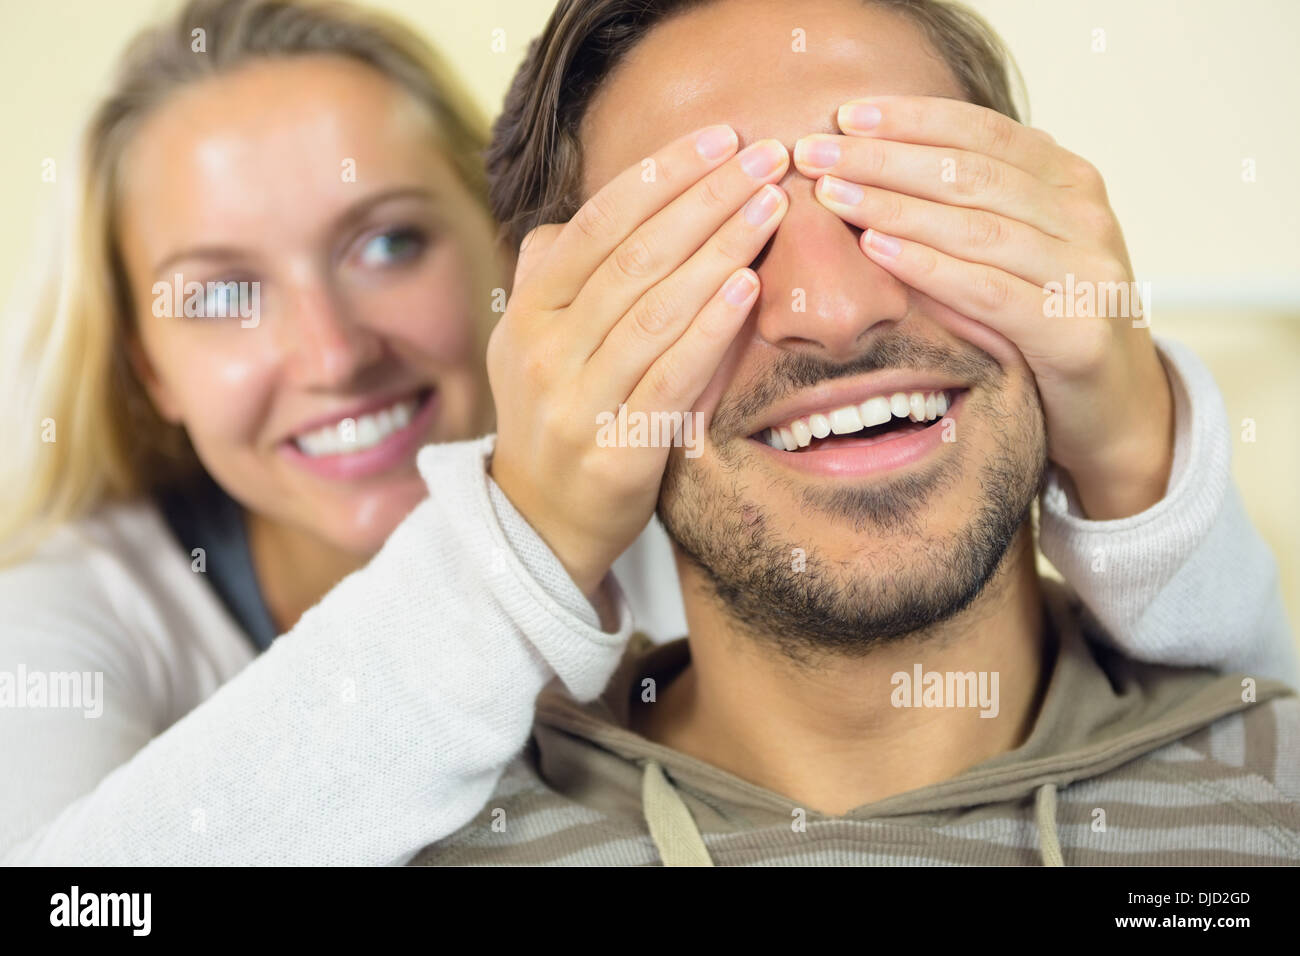 Amused young woman making fun with her boyfriend Stock Photo